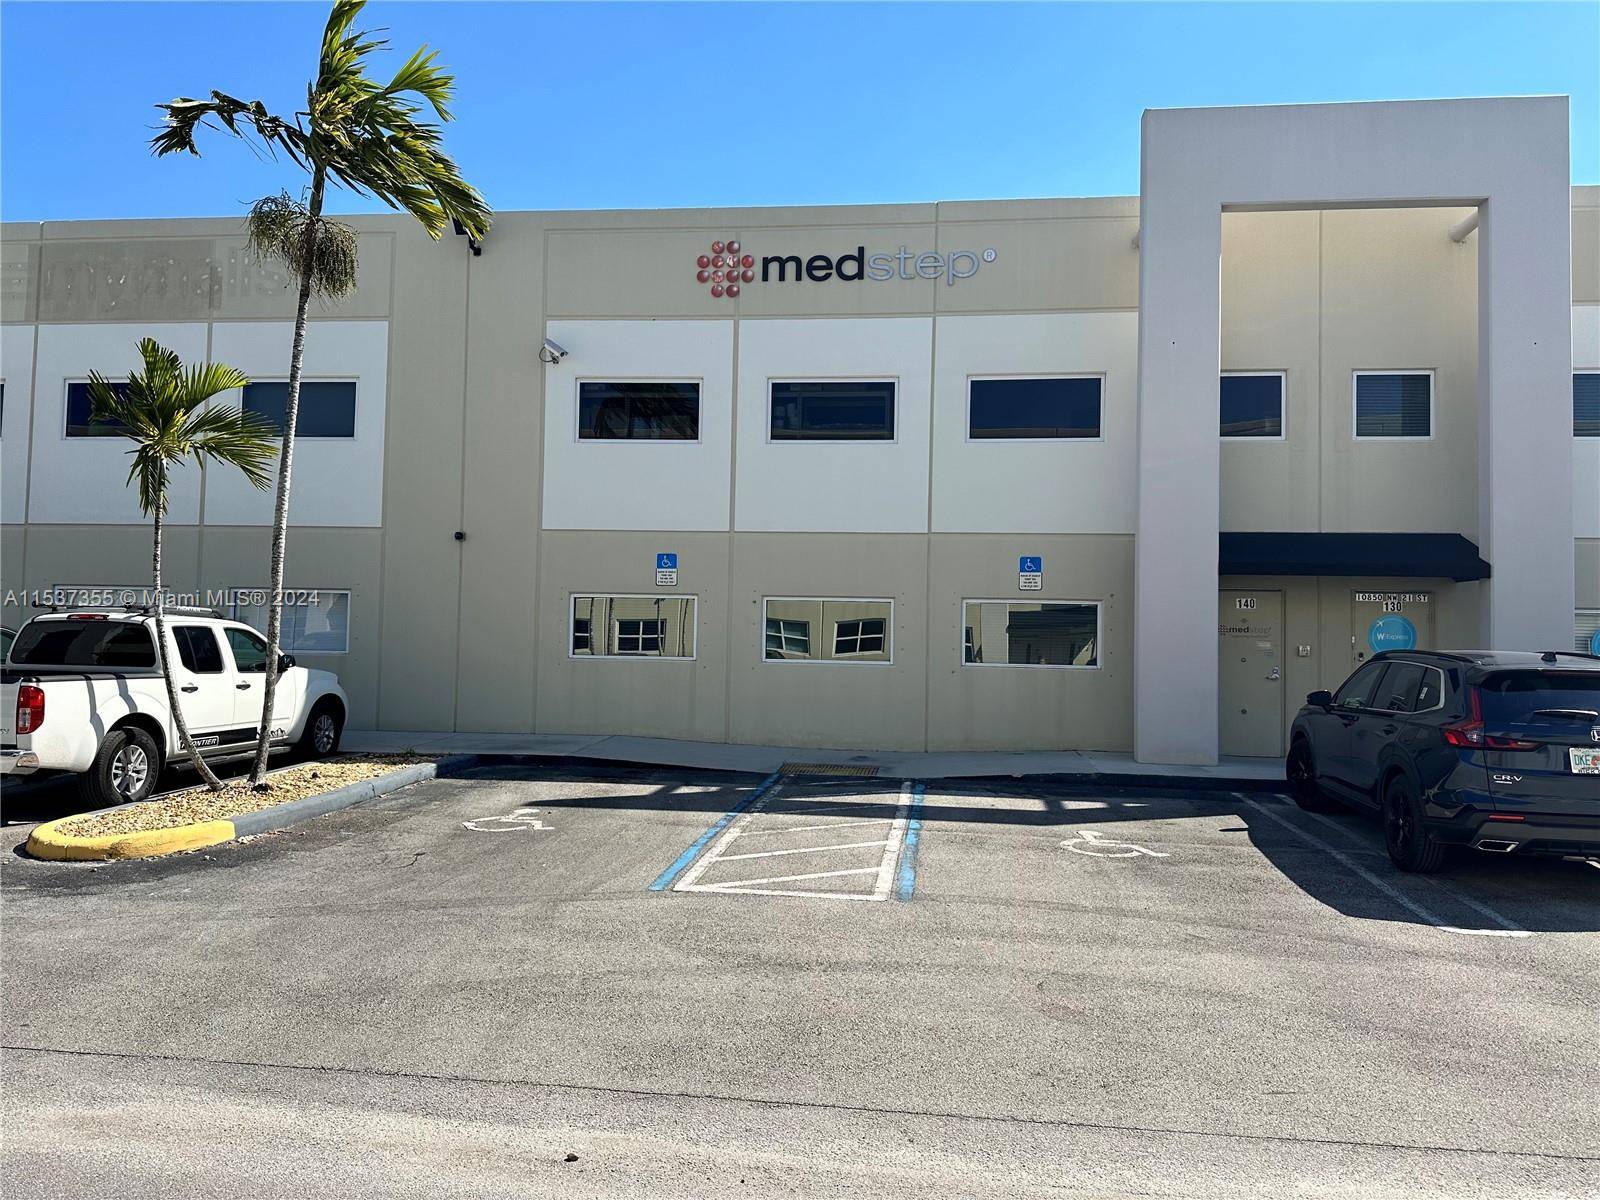 3, 952 SF Total Office Warehouse 2, 400 SF Warehouse 800 SF Office Ceramic Tile Floors, Glass Doors, Partitions, Acoustic Ceilings, Central AC 800 SF Mezzanine with Sink Kitchen 22' ...